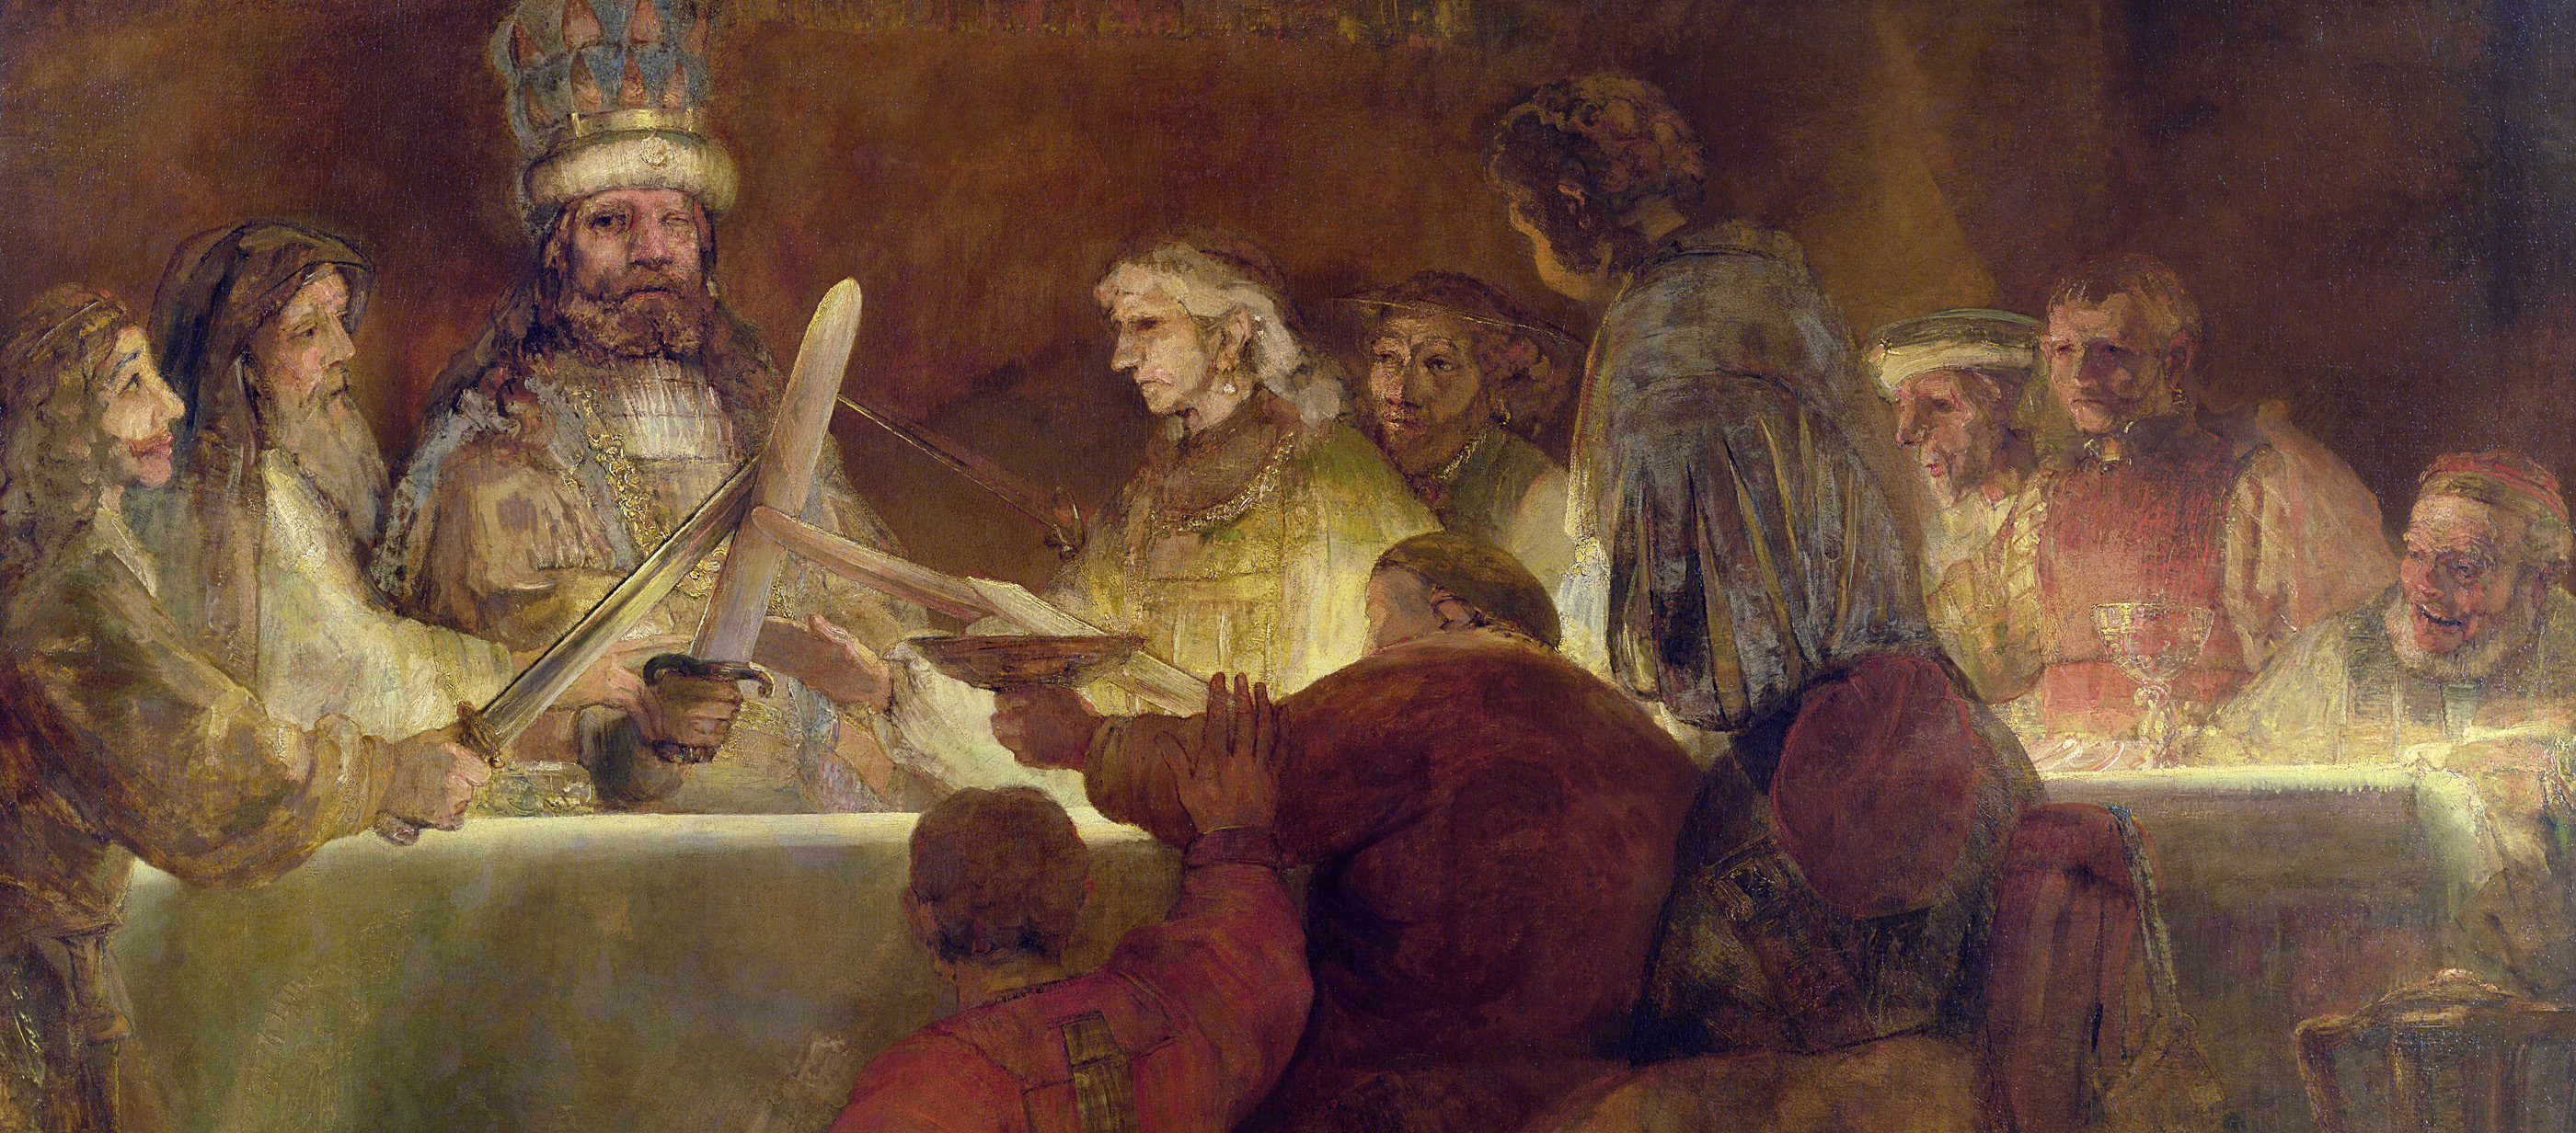 Rembrandt painting of a group conspiring around a table.